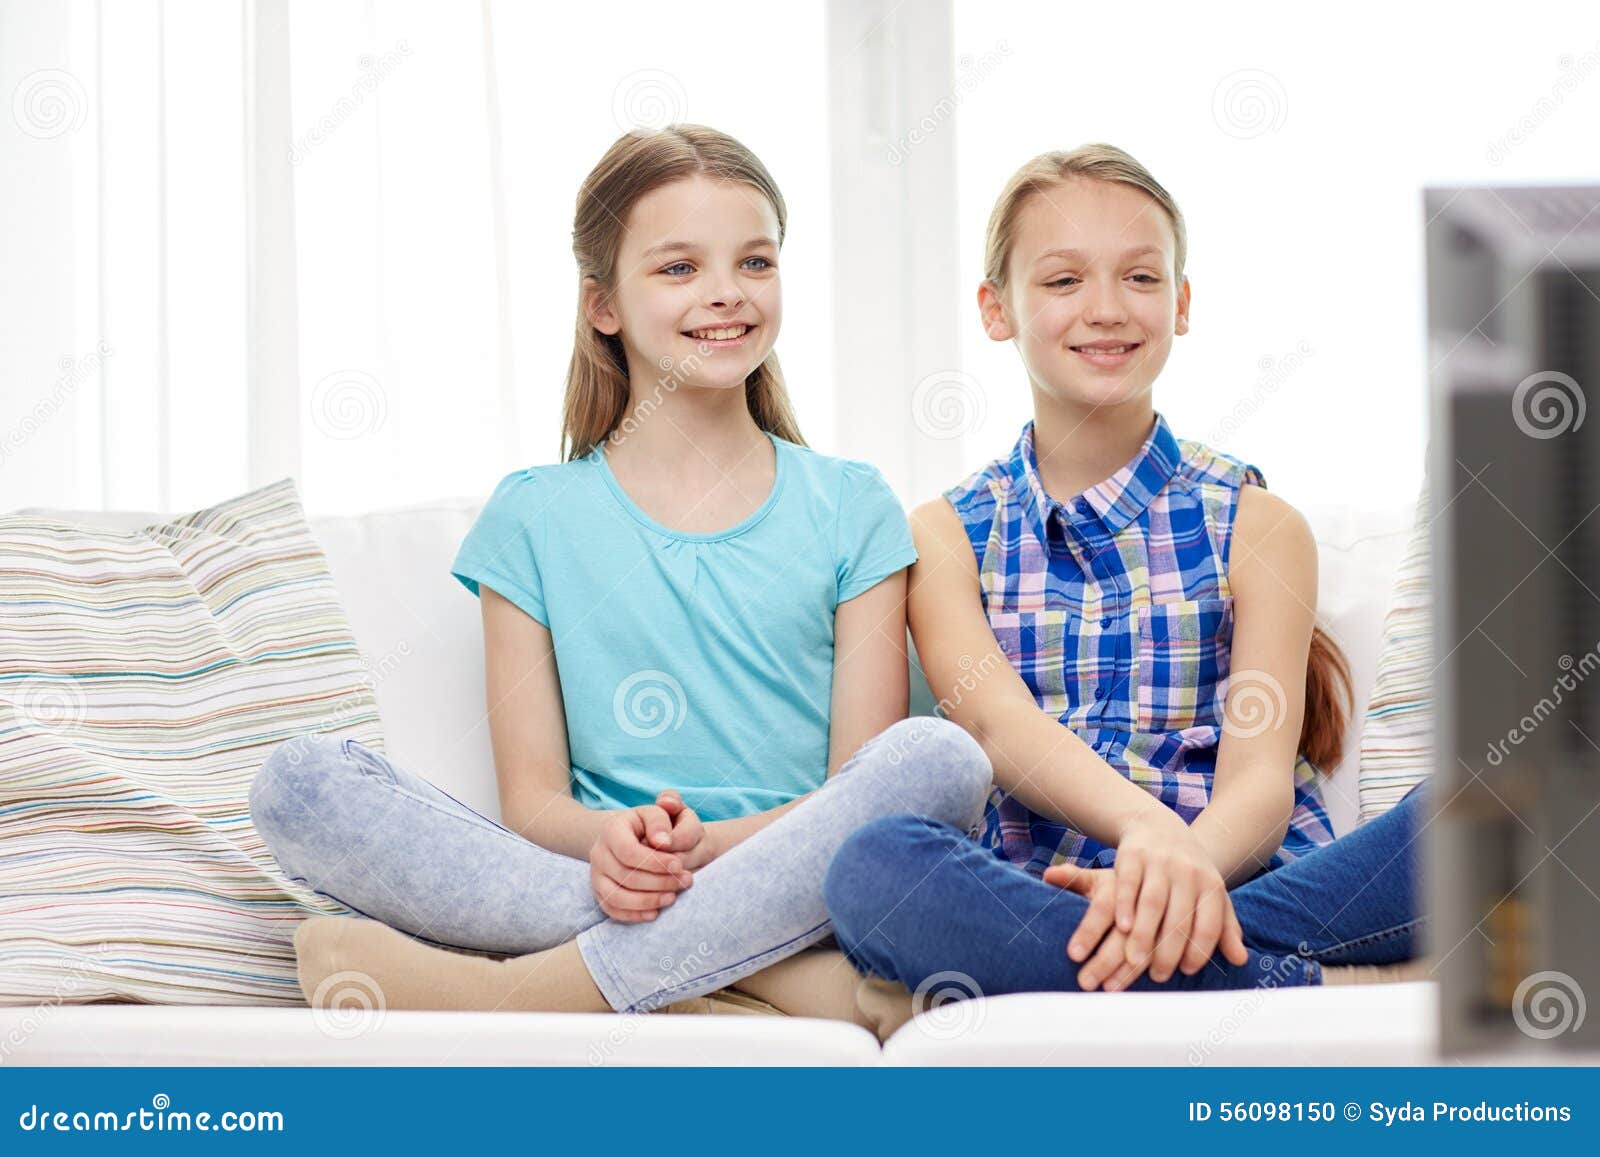 two-happy-little-girls-watching-tv-home-people-children-television-friends-friendship-concept-56098150.jpg